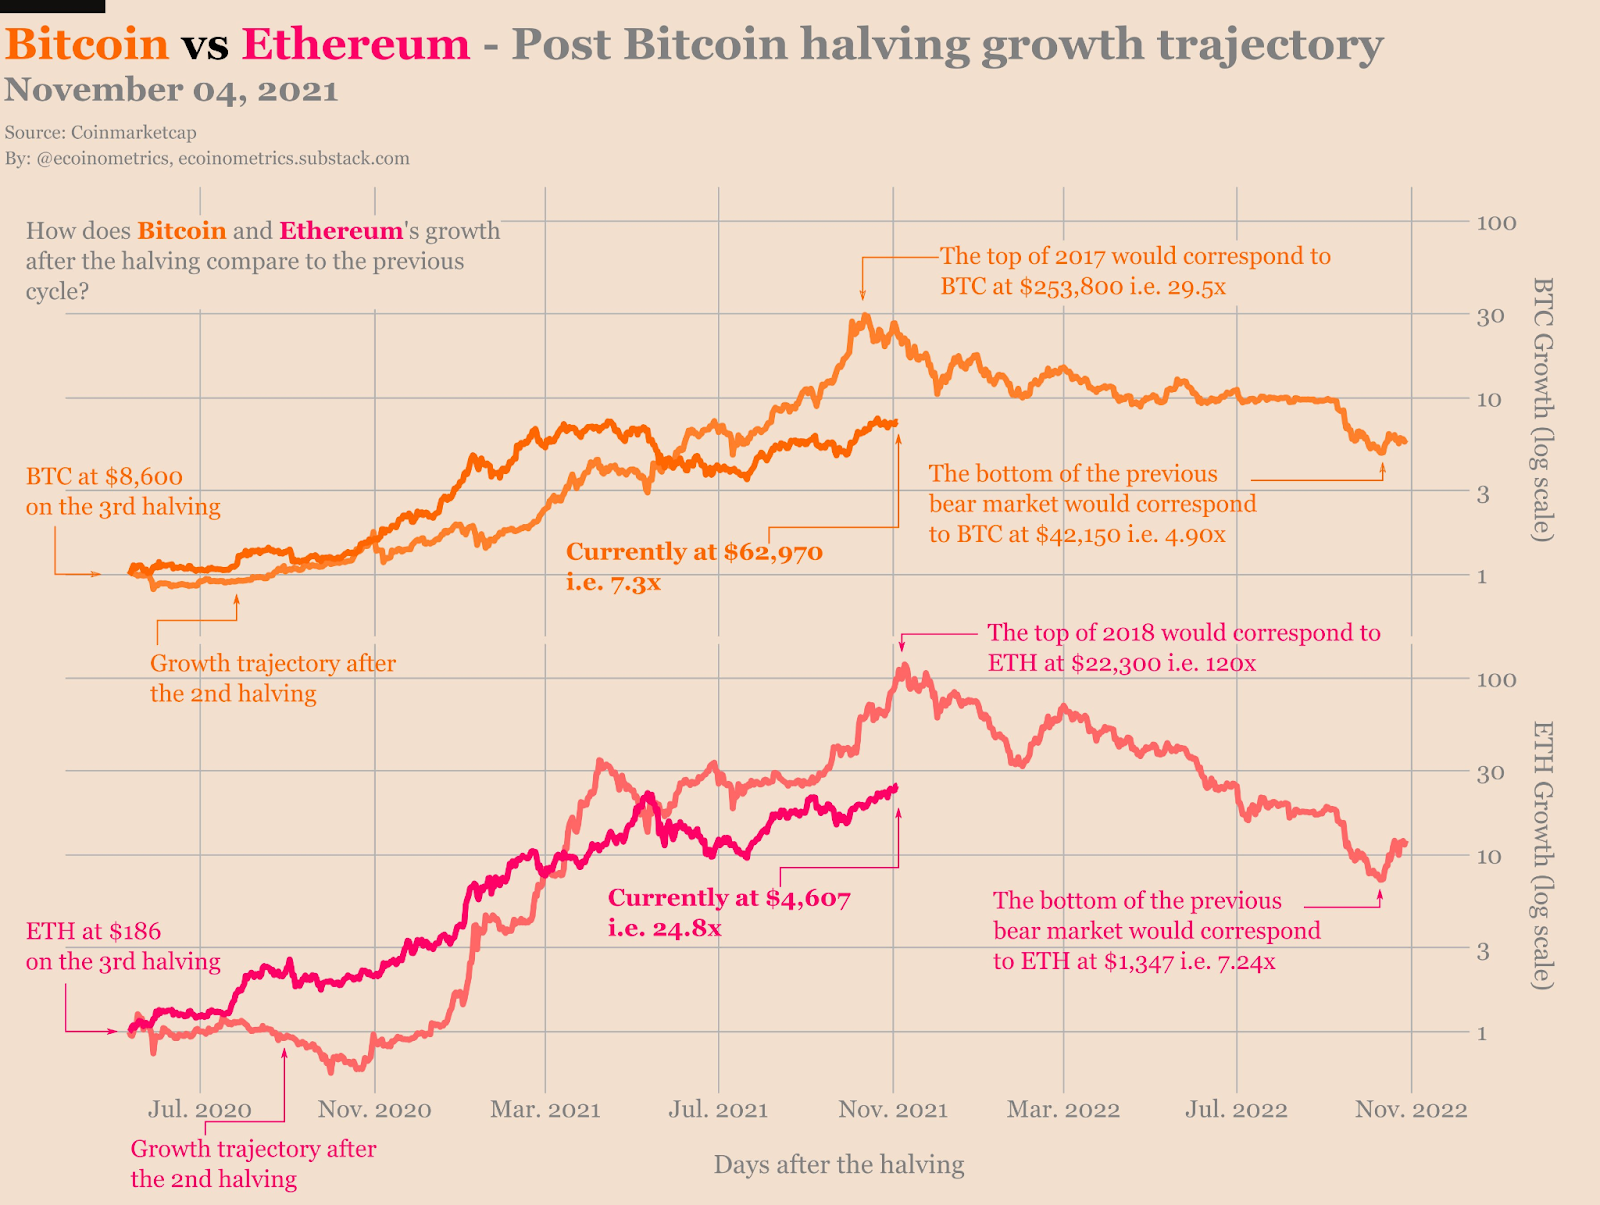 An infographic showcasing Bitcoin and Ethereum price in November 2021 in comparison to the previous halving cycle